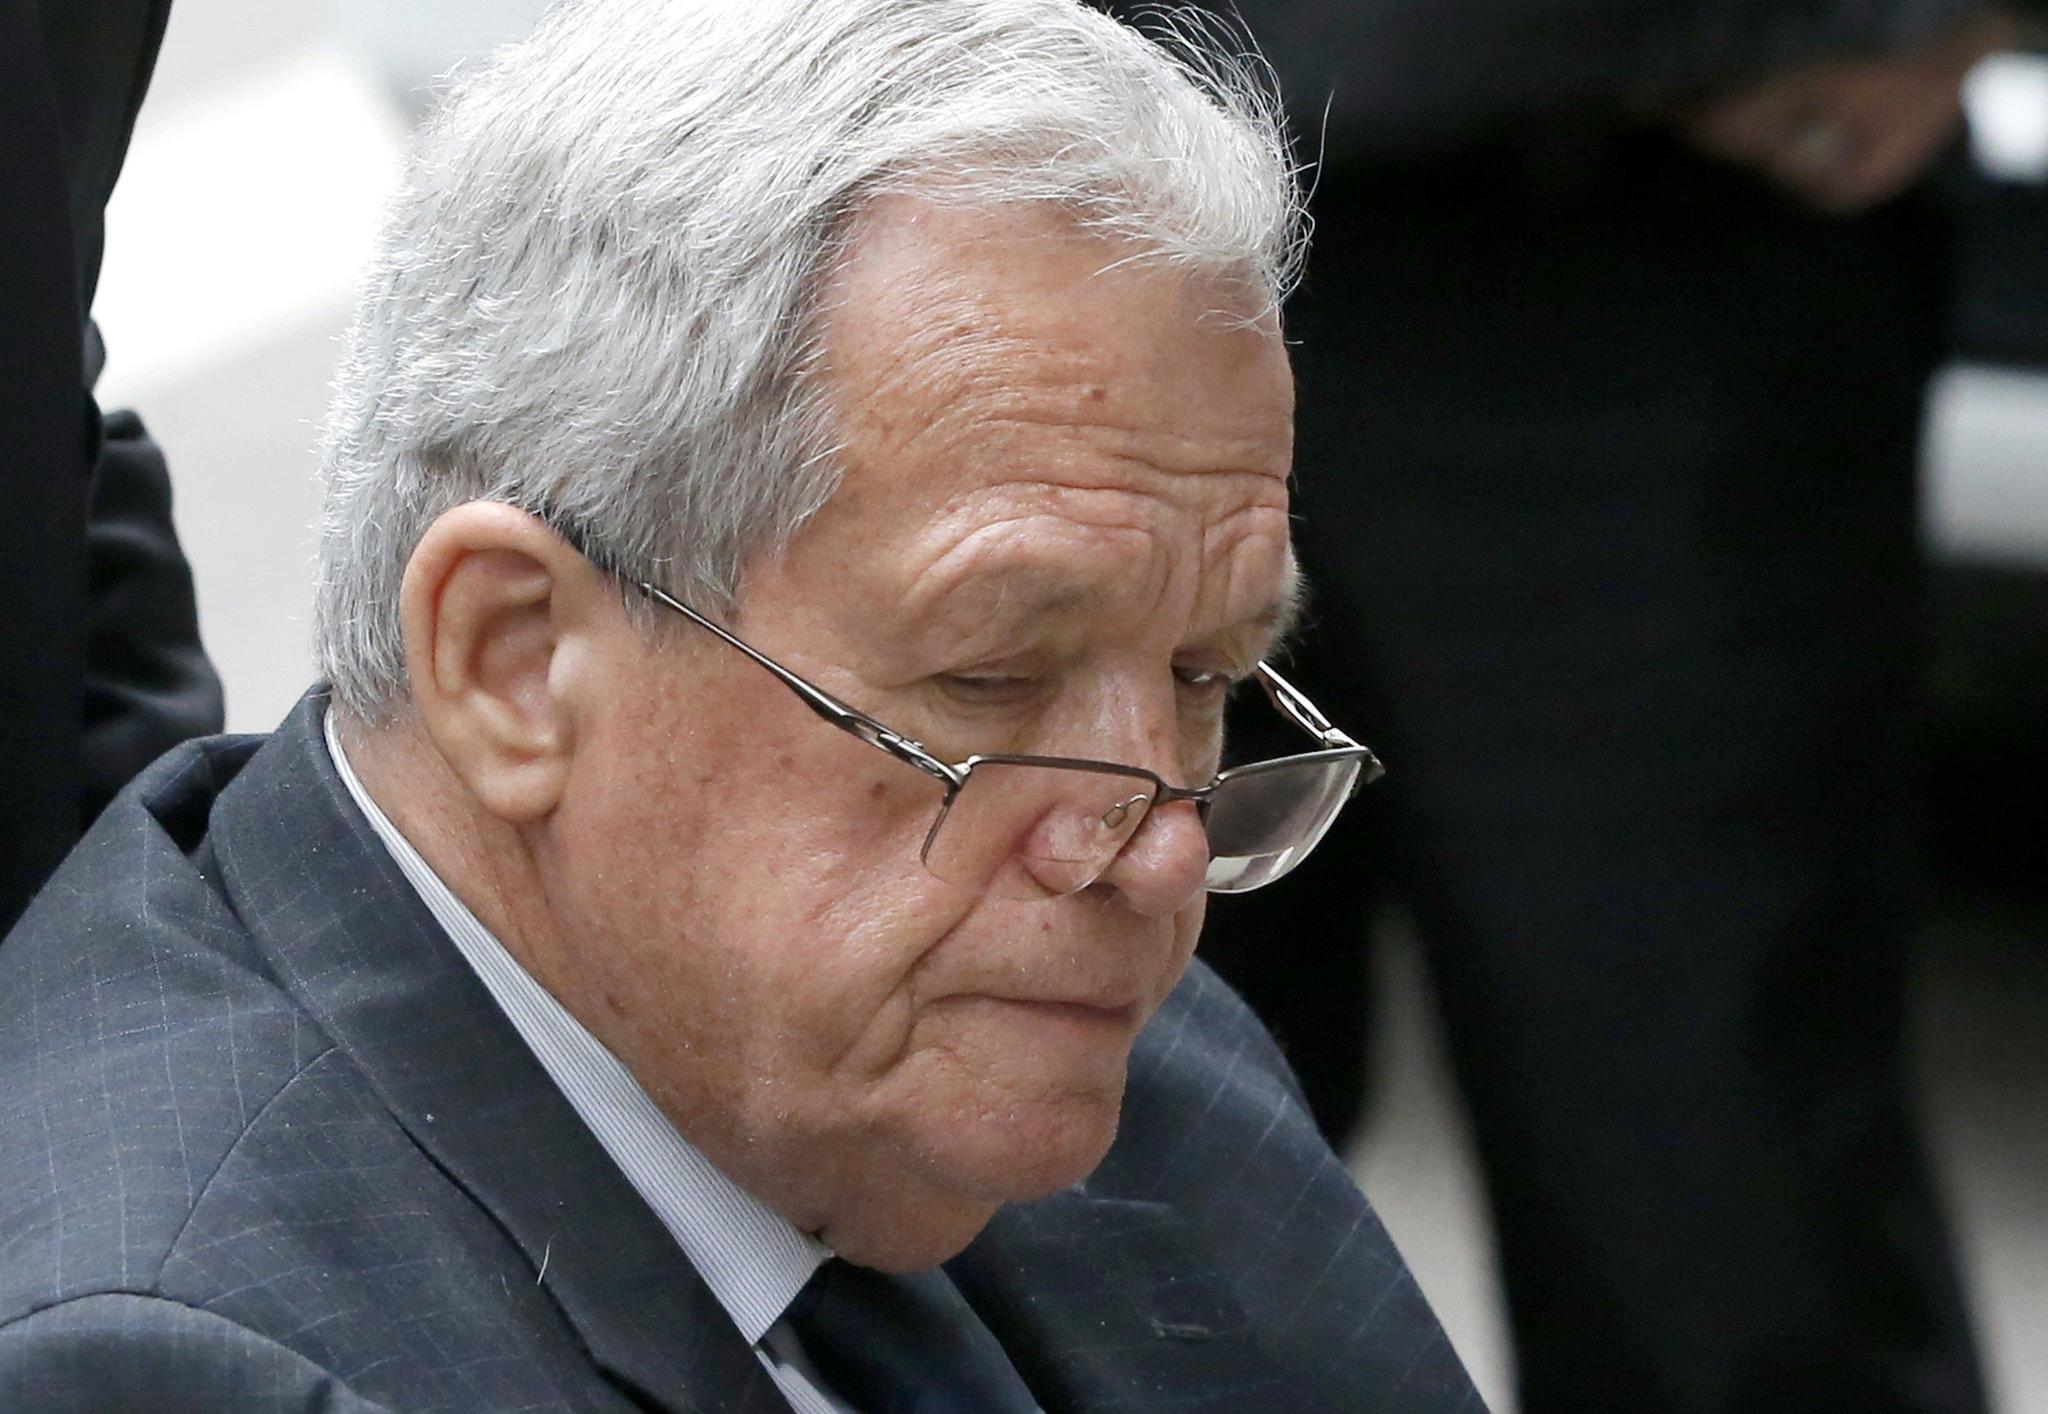 Judge grants anonymity in new sex assault suit against Dennis Hastert